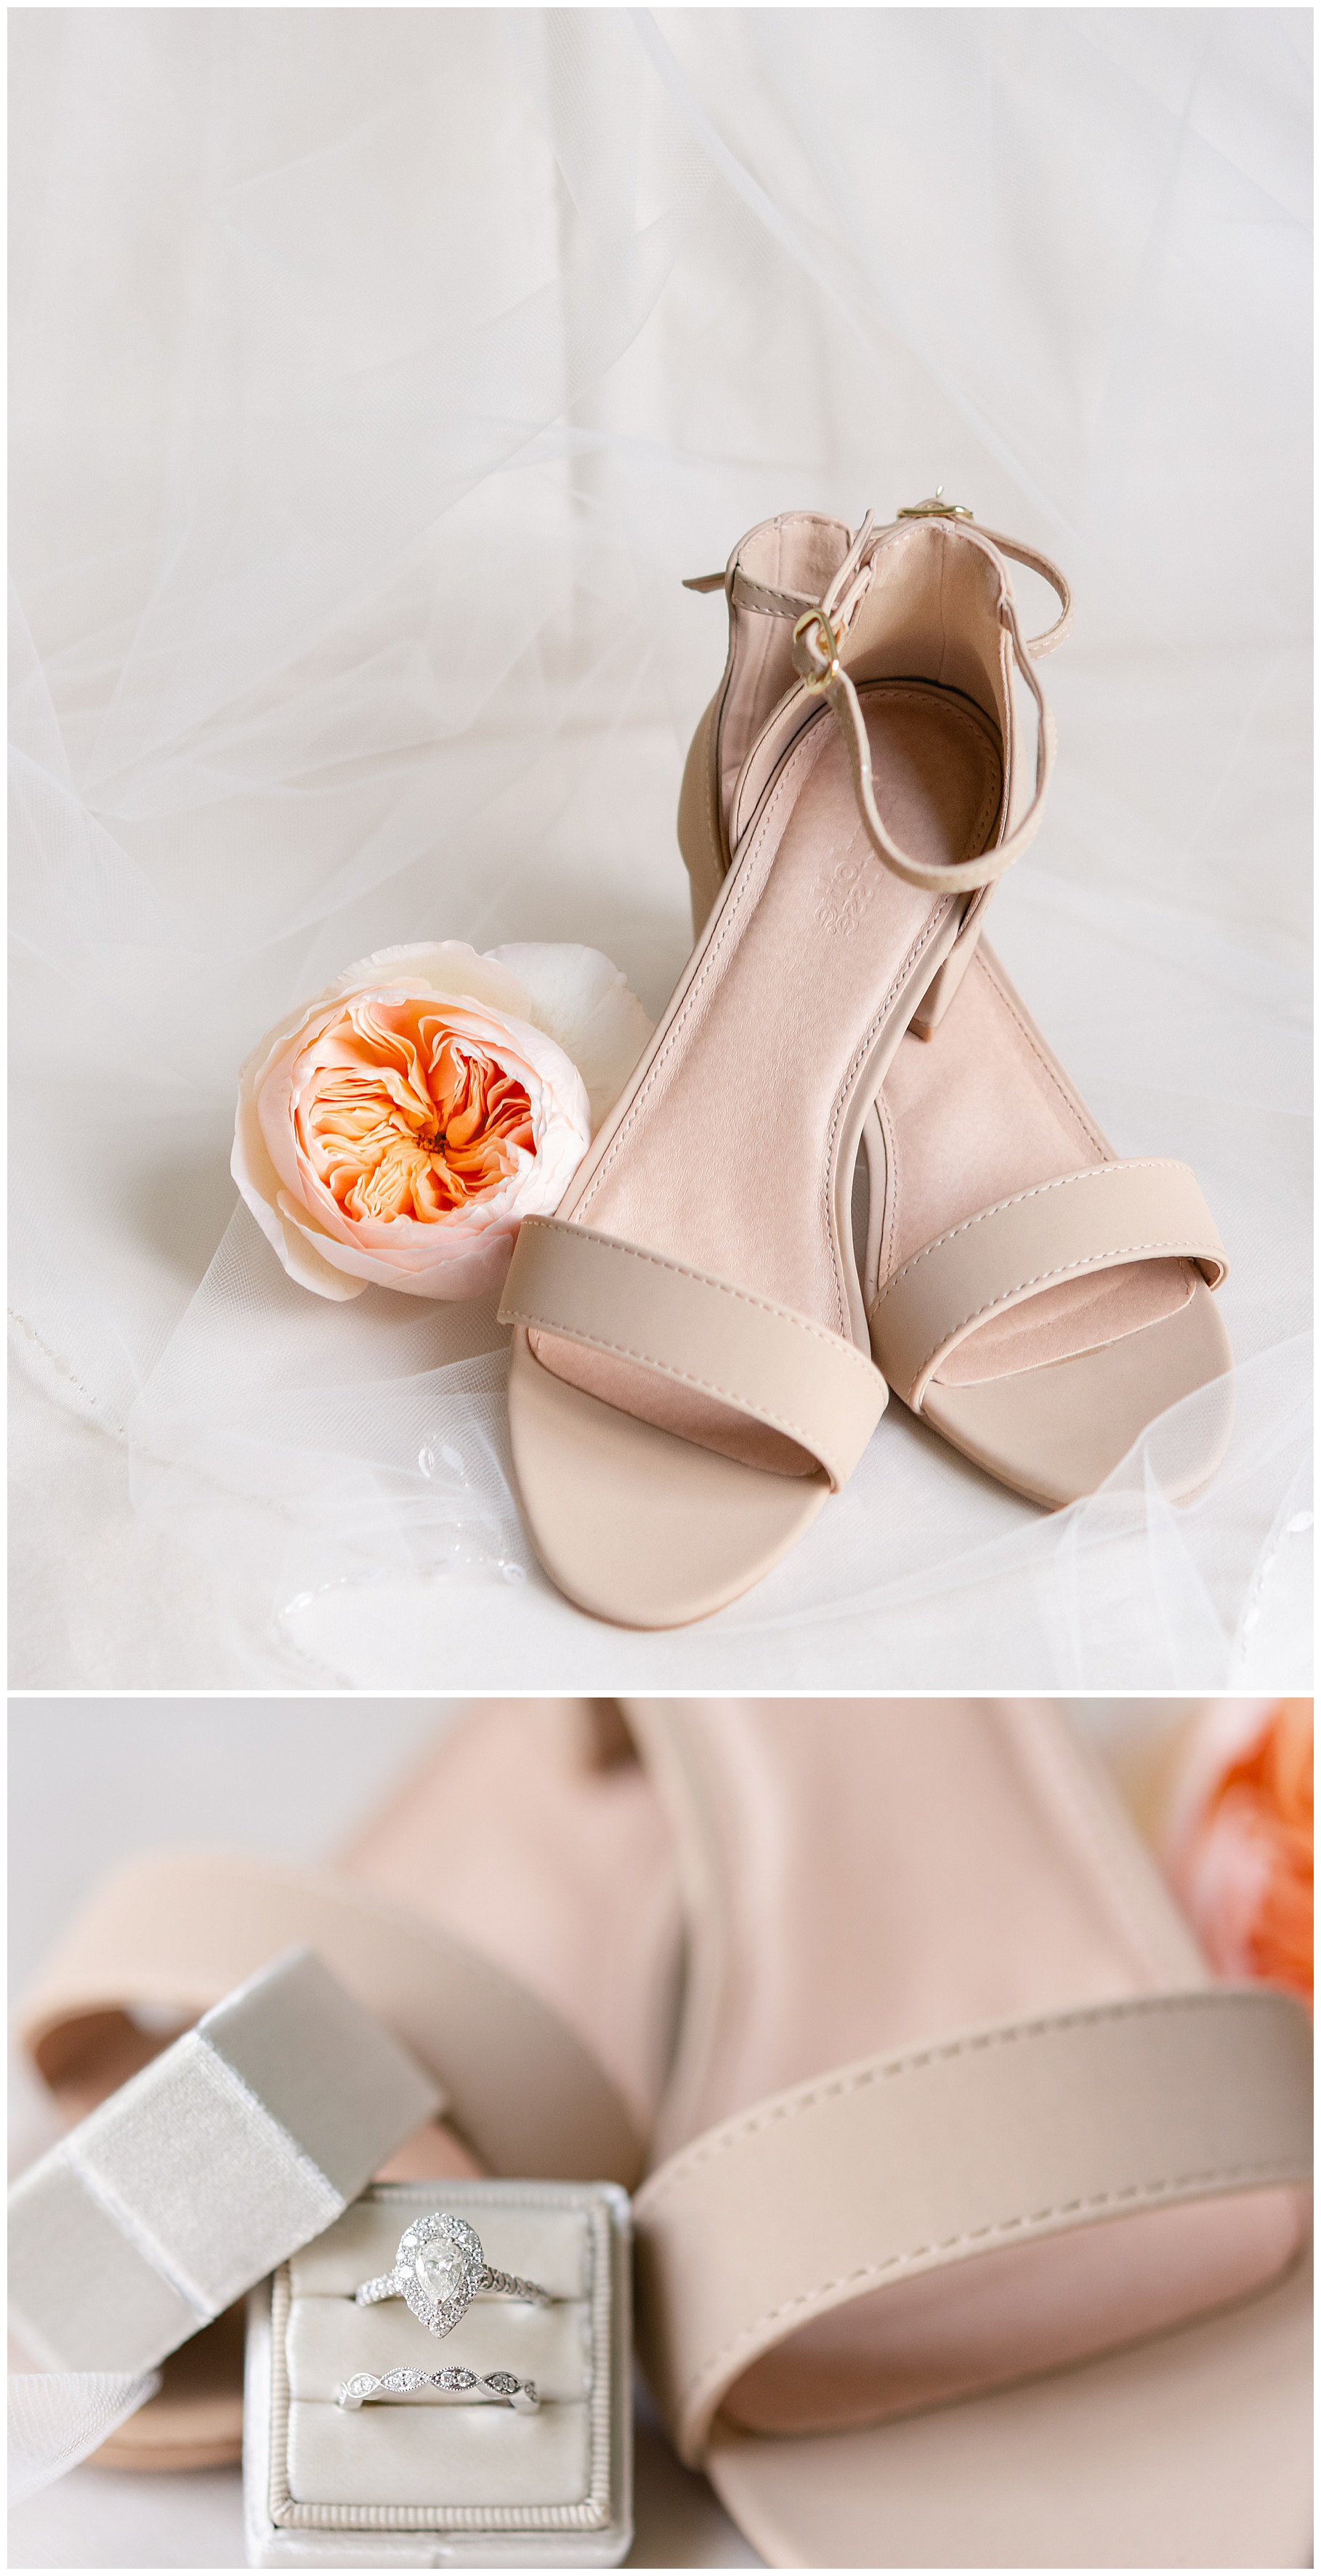 Wedding details - tan scrappy heels with peony and ring